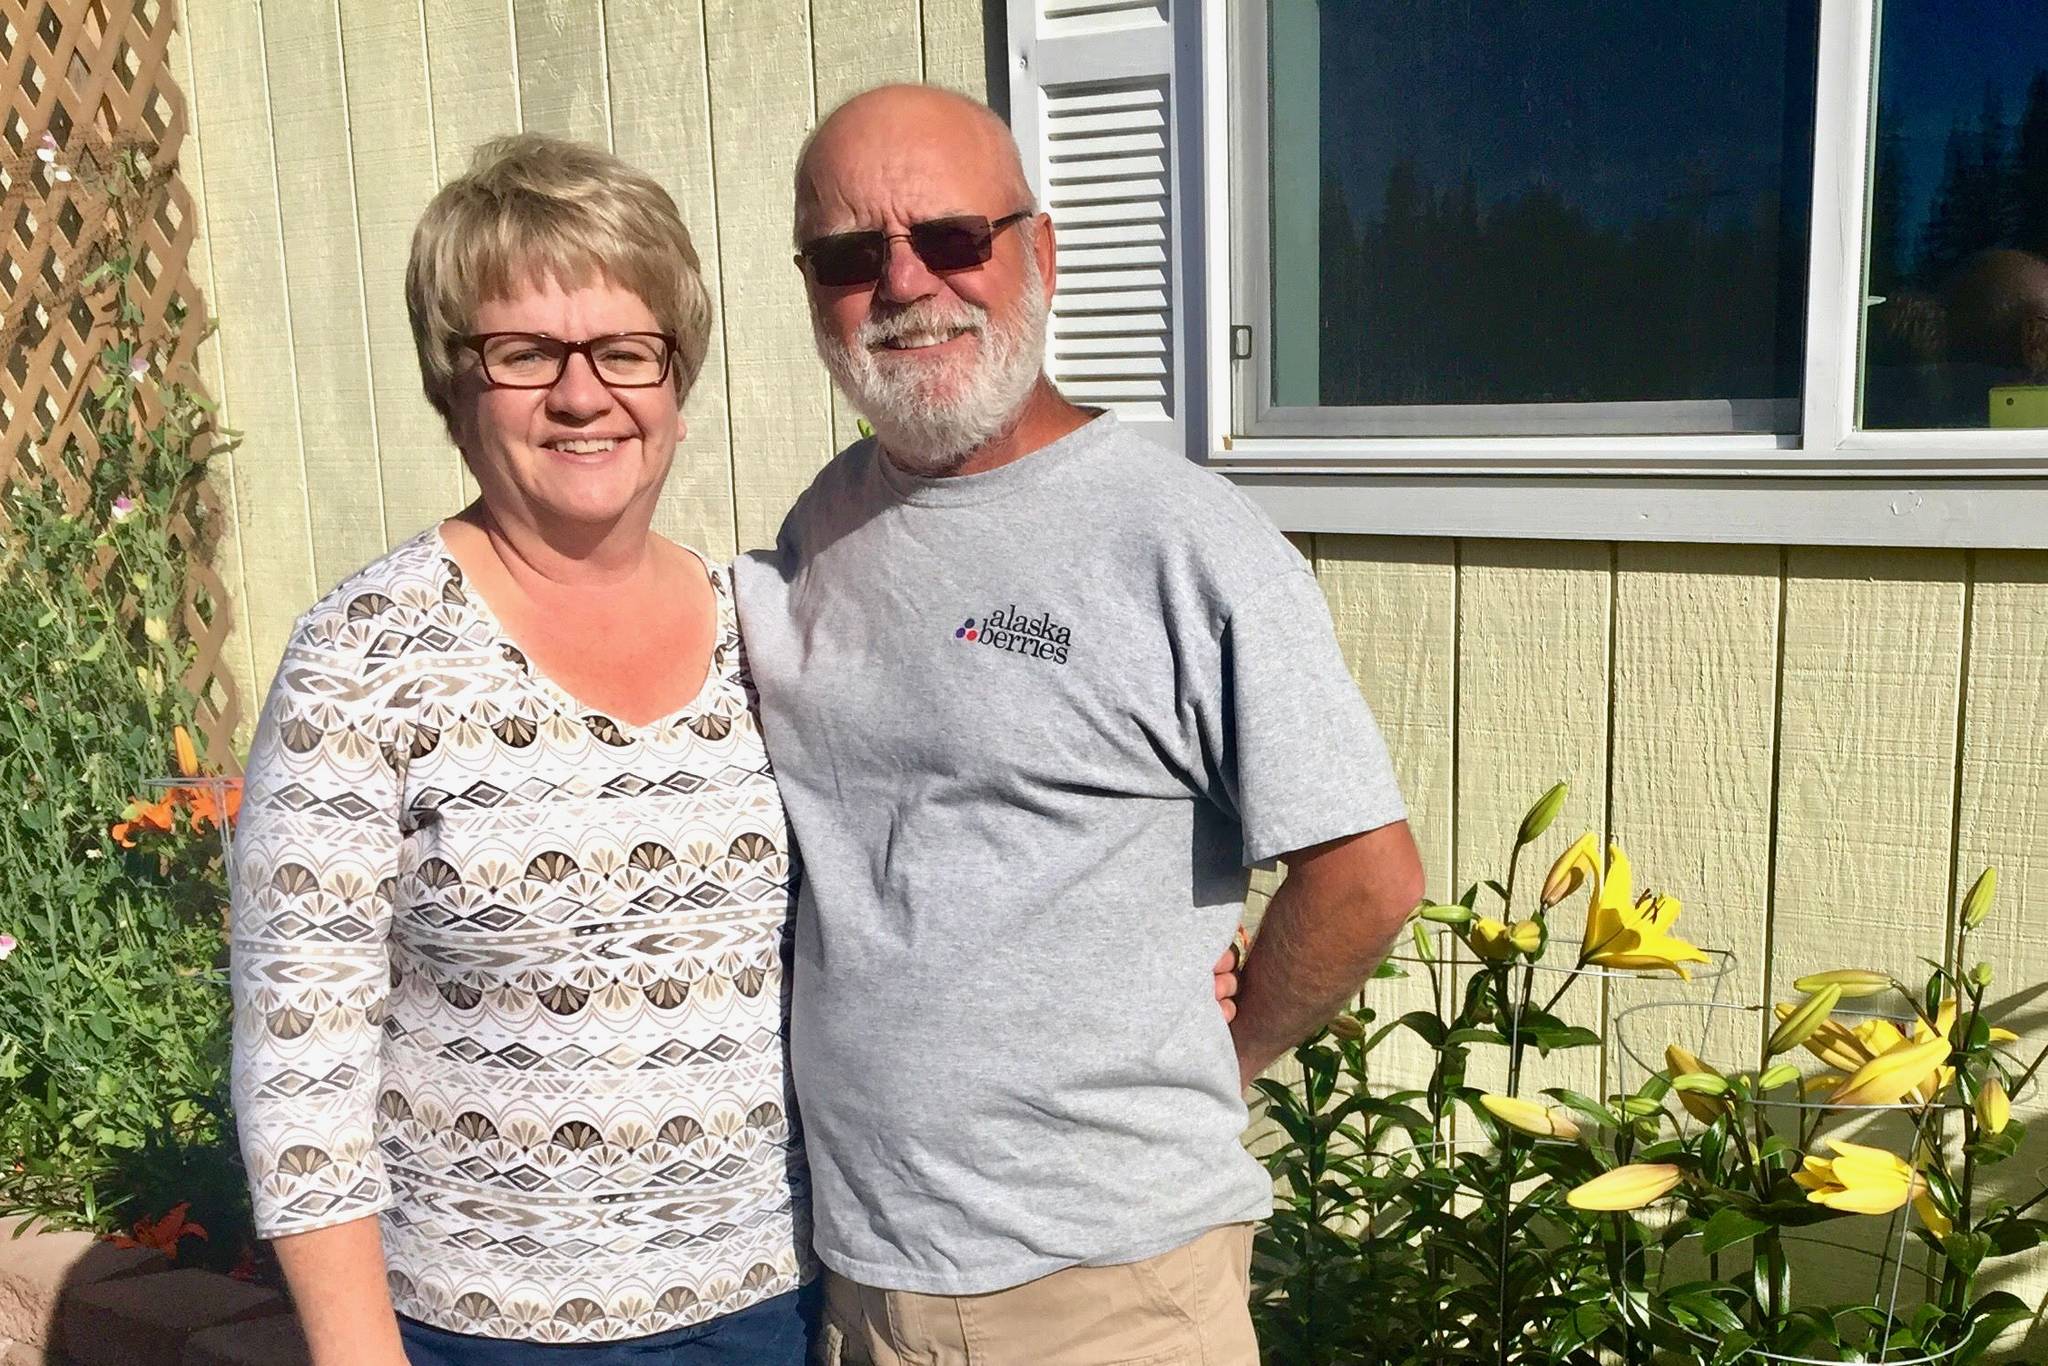 Laurie and Brian Olson at their farm on Wednesday, Aug. 15, 2018, near Soldotna, Alaska. The couple was recently named Farm Family of the Year by the Alaska State Fair. (Photo by Victoria Petersen/Peninsula Clarion)